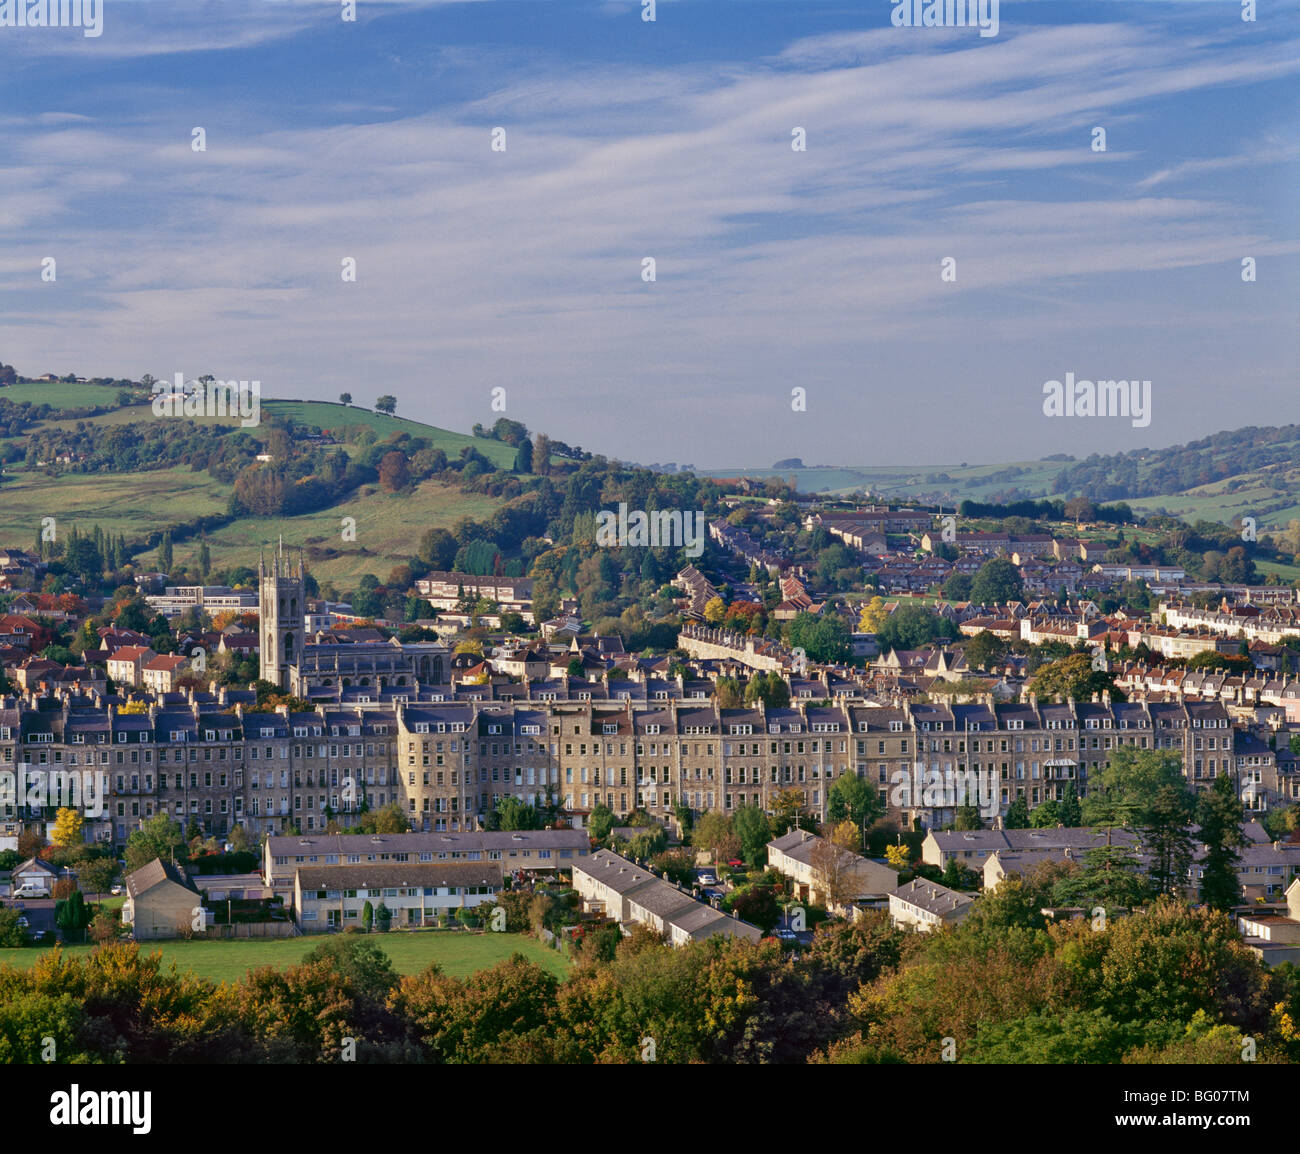 Terrace housing in the Avon valley, on the outskirts of Bath, Avon, England, United Kingdom, Europe Stock Photo